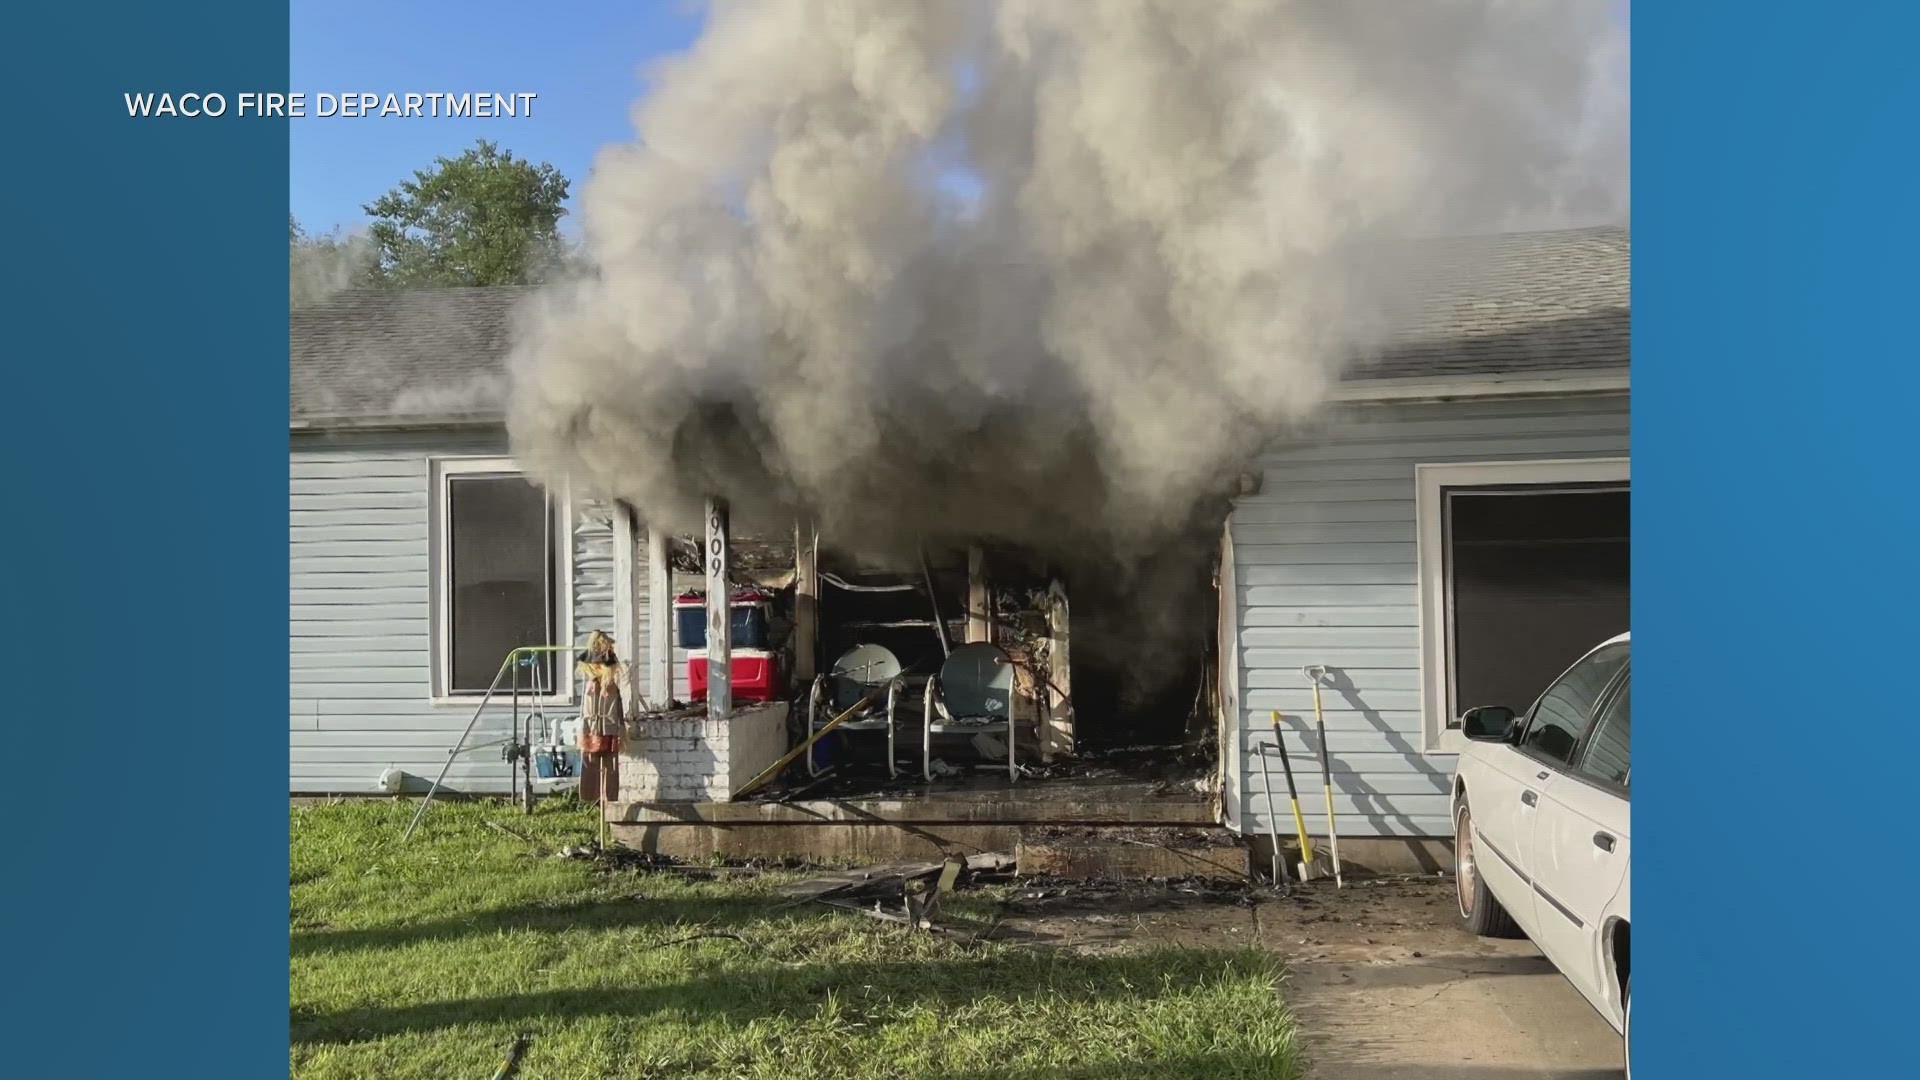 An 8-month-old baby and the baby's father were both reportedly injured in a house fire on Nov. 3.